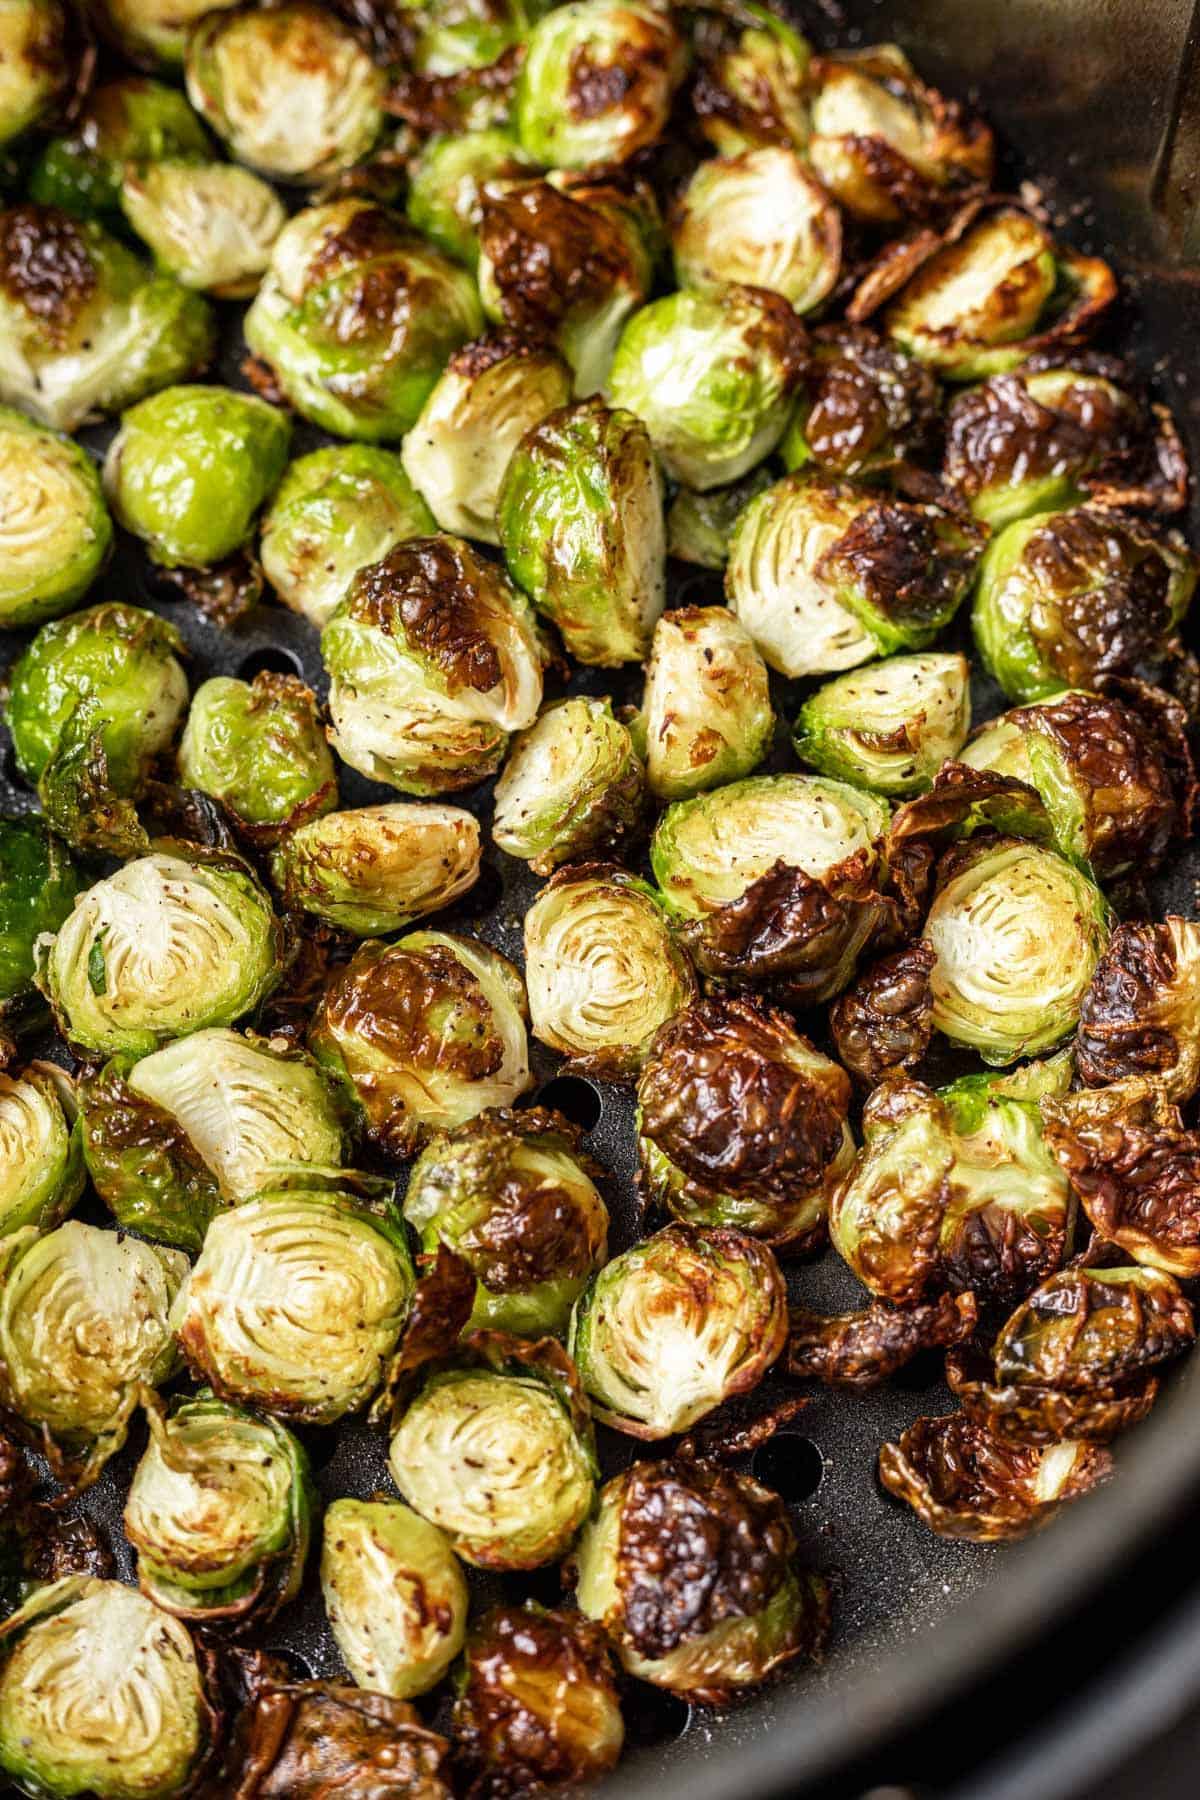 Brussels sprouts after cooking in air fryer.